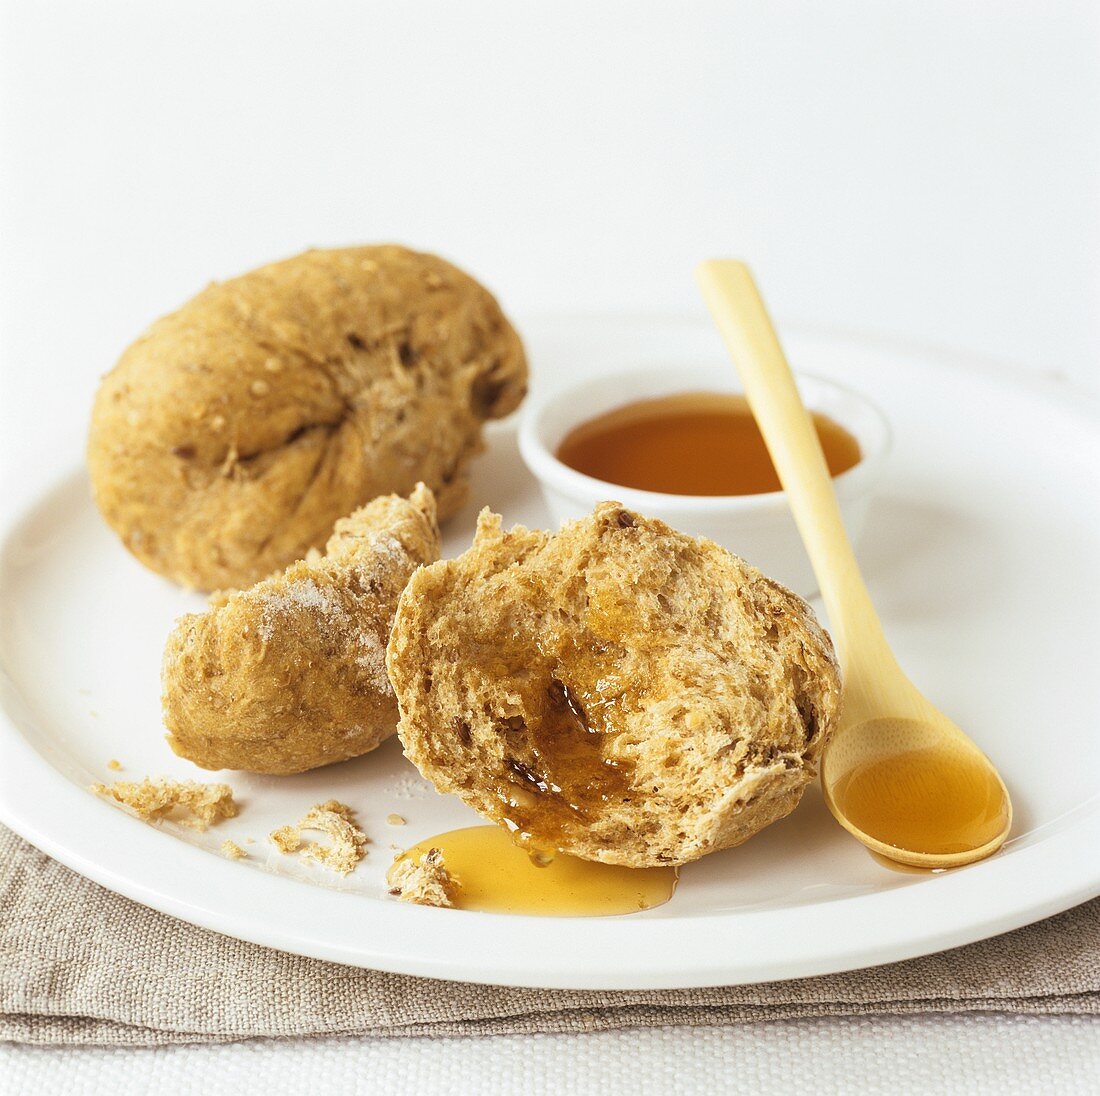 Wholemeal roll with honey